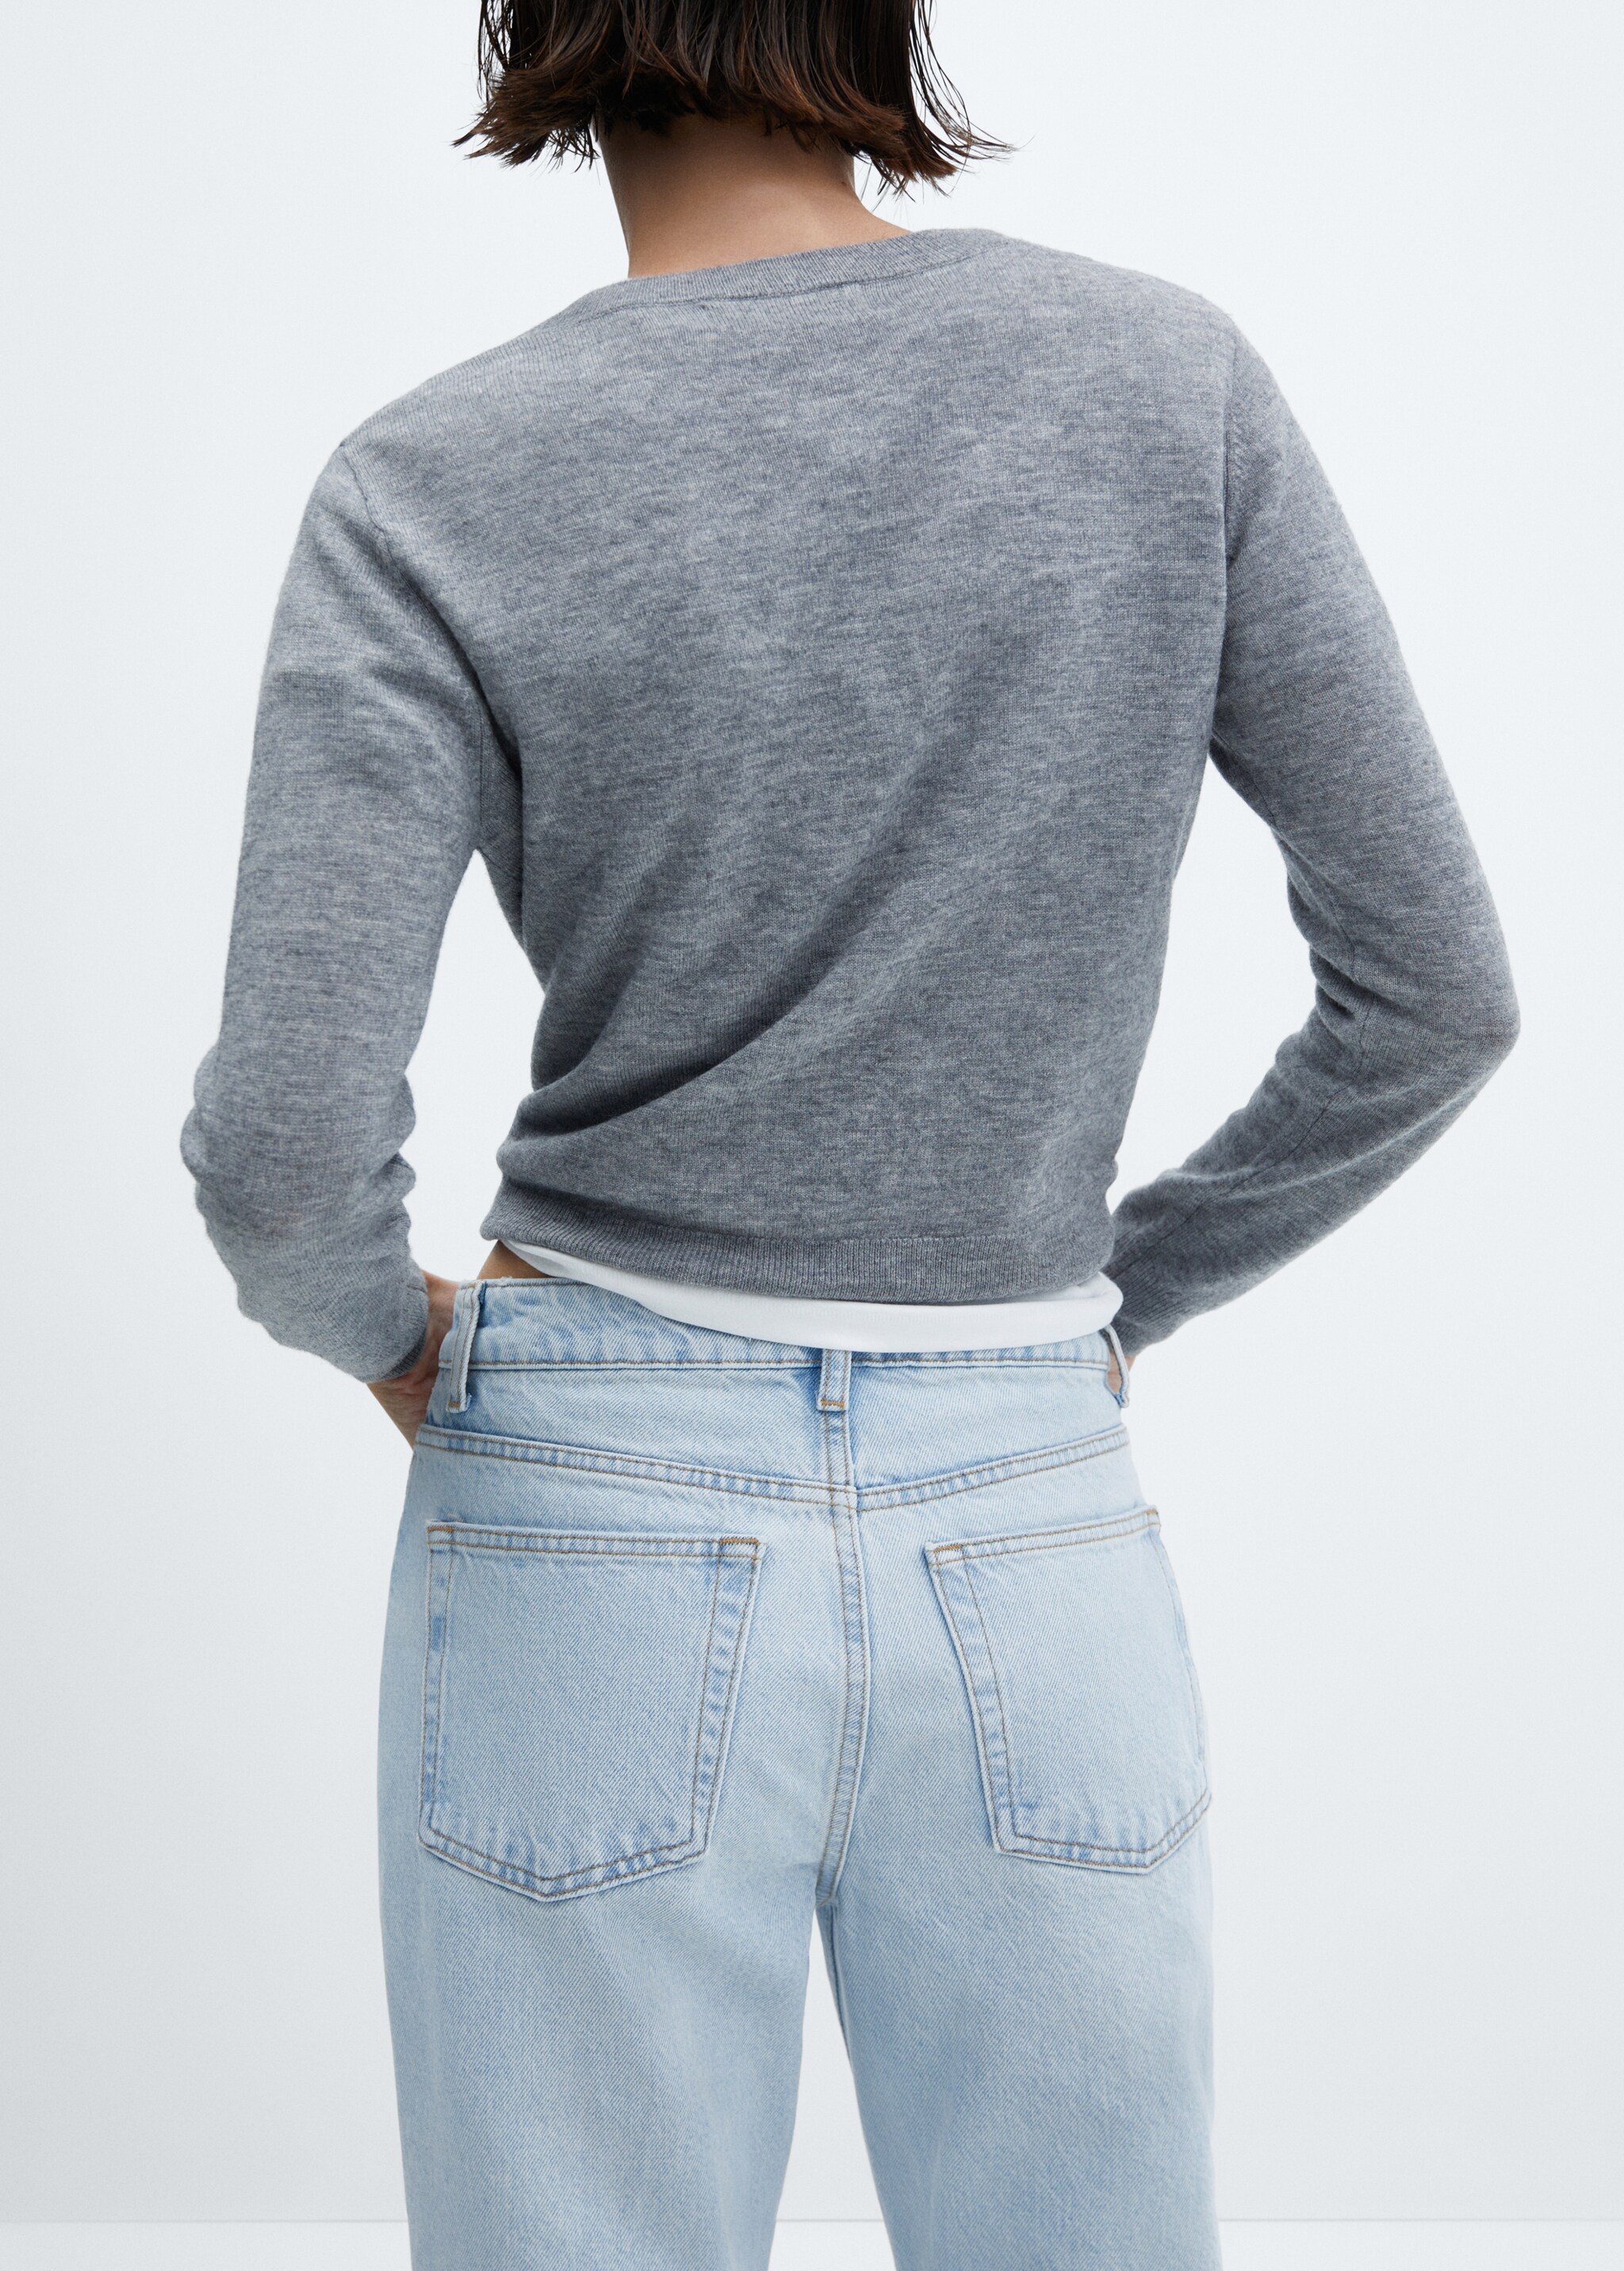 High waist straight jeans - Details of the article 6